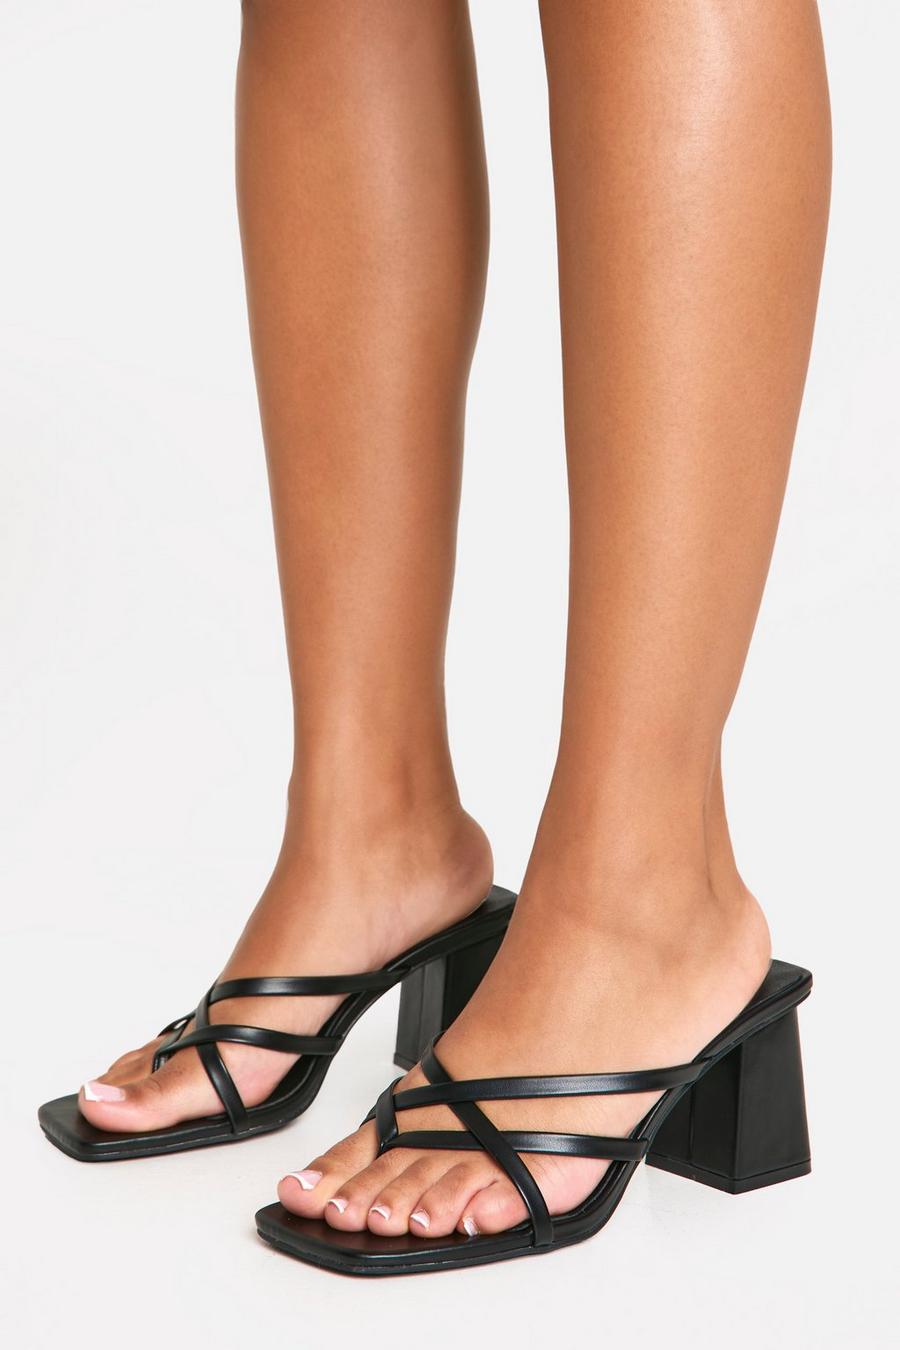 Black Crossover Strap Toe Post Heeled Mules 